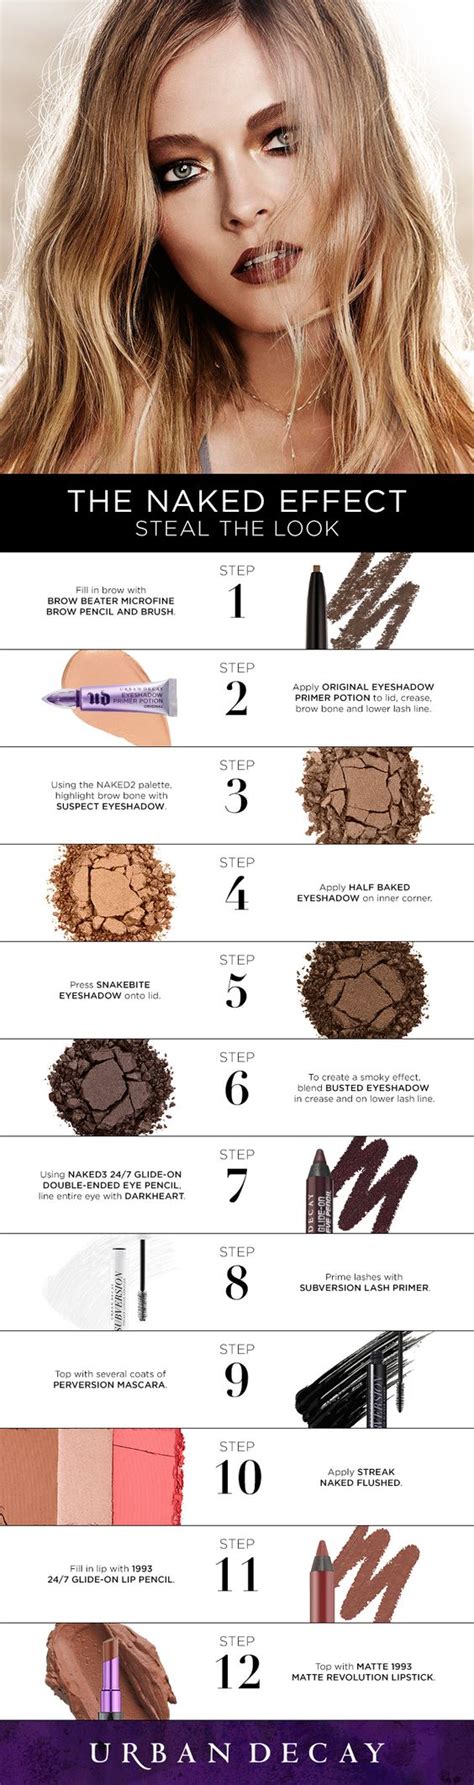 20 Makeup Tricks Every Girl Should Know Flawless Makeup Tips And